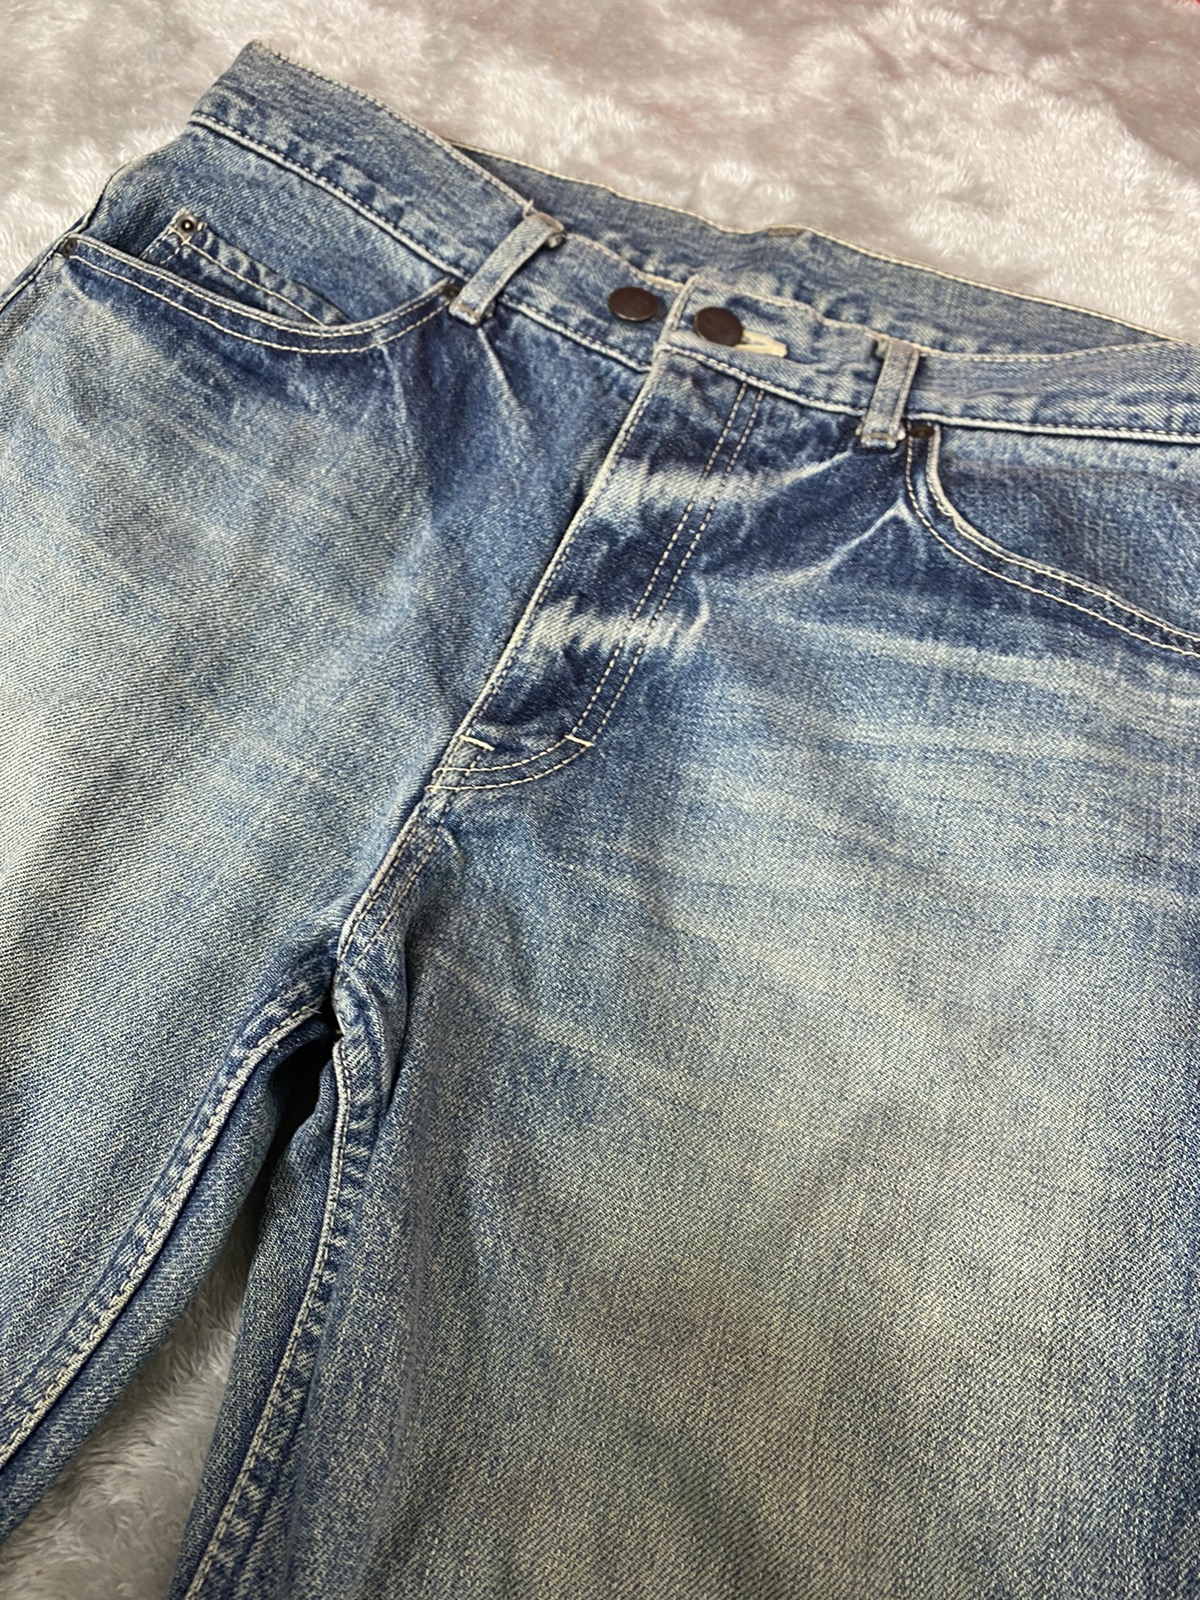 N. Hollywood Denim Faded Jeans. S0208 - 7